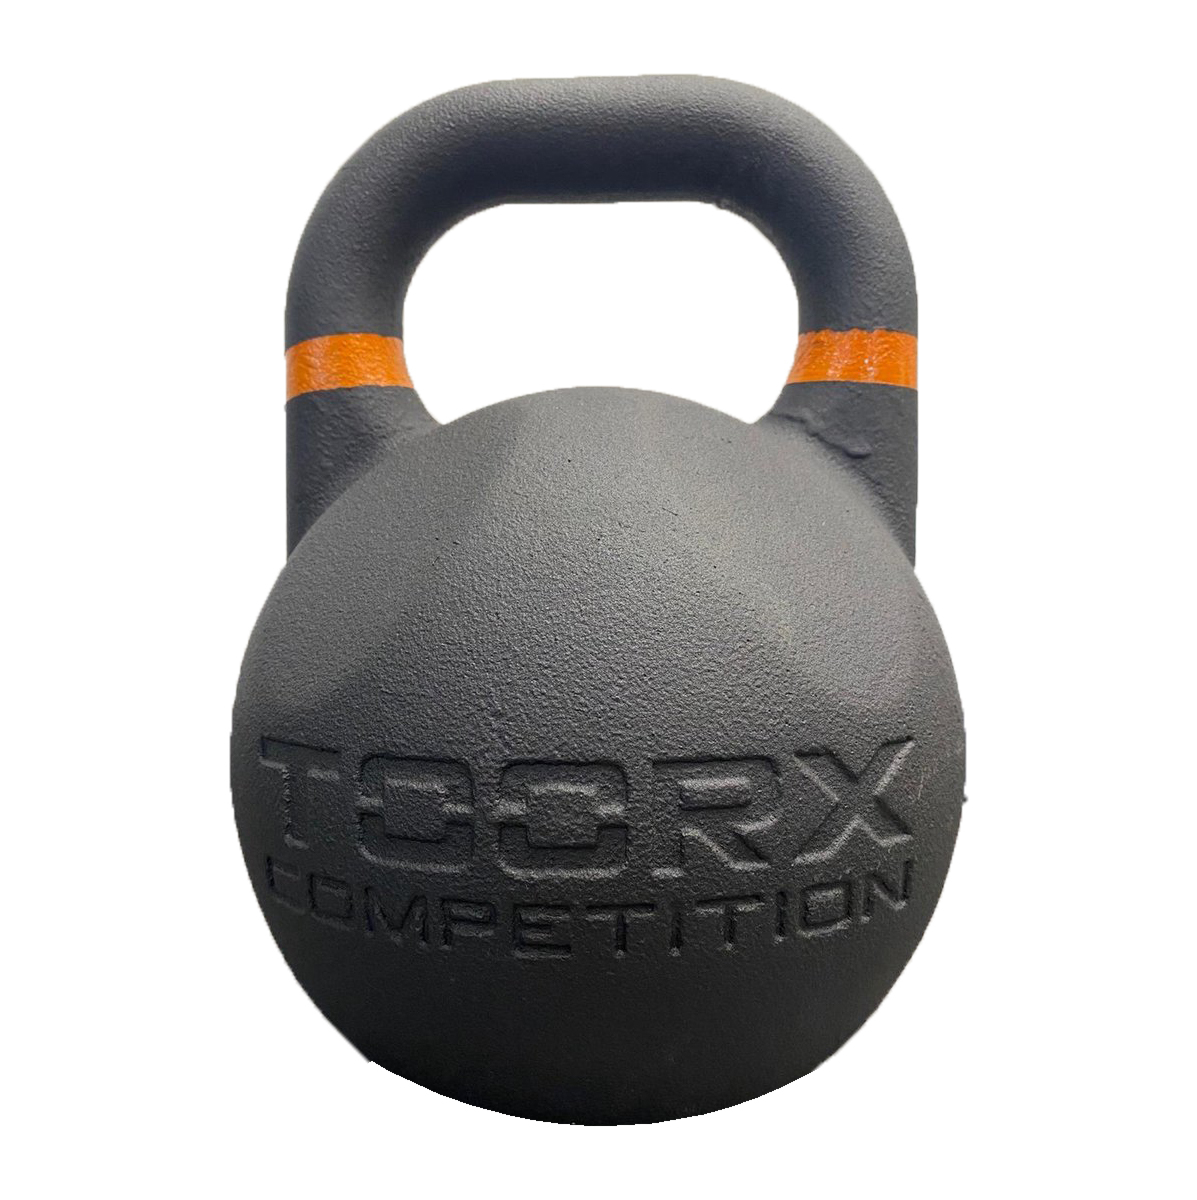 Toorx AKCA Competition Kettlebell - Staal - 8 kg